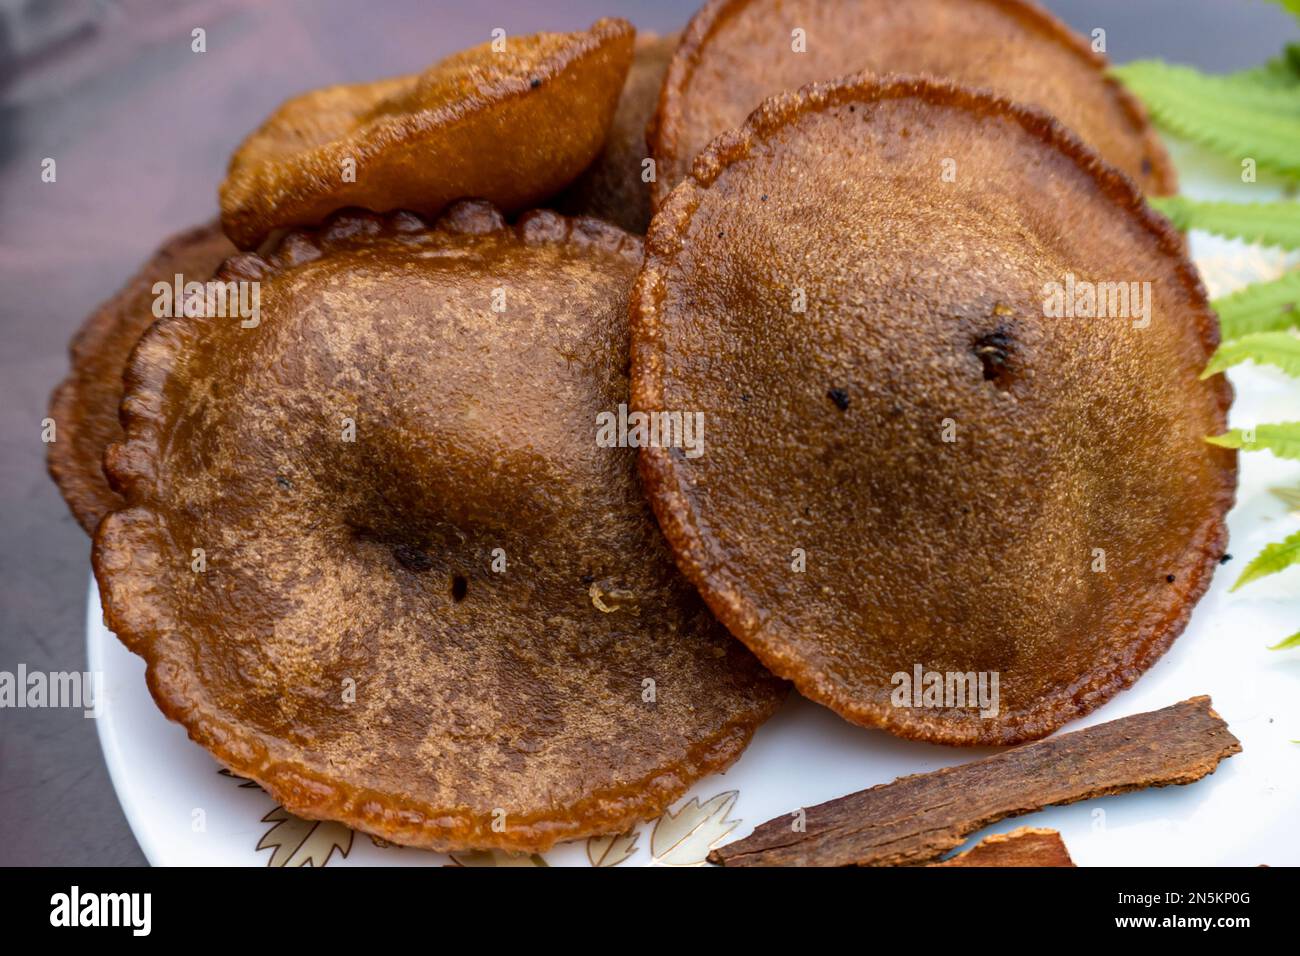 Oily cake is a popular food in Bangladesh and by Indian people. Oil cake is made from rice with oil, which is called tele pitha in Bangladesh. Stock Photo